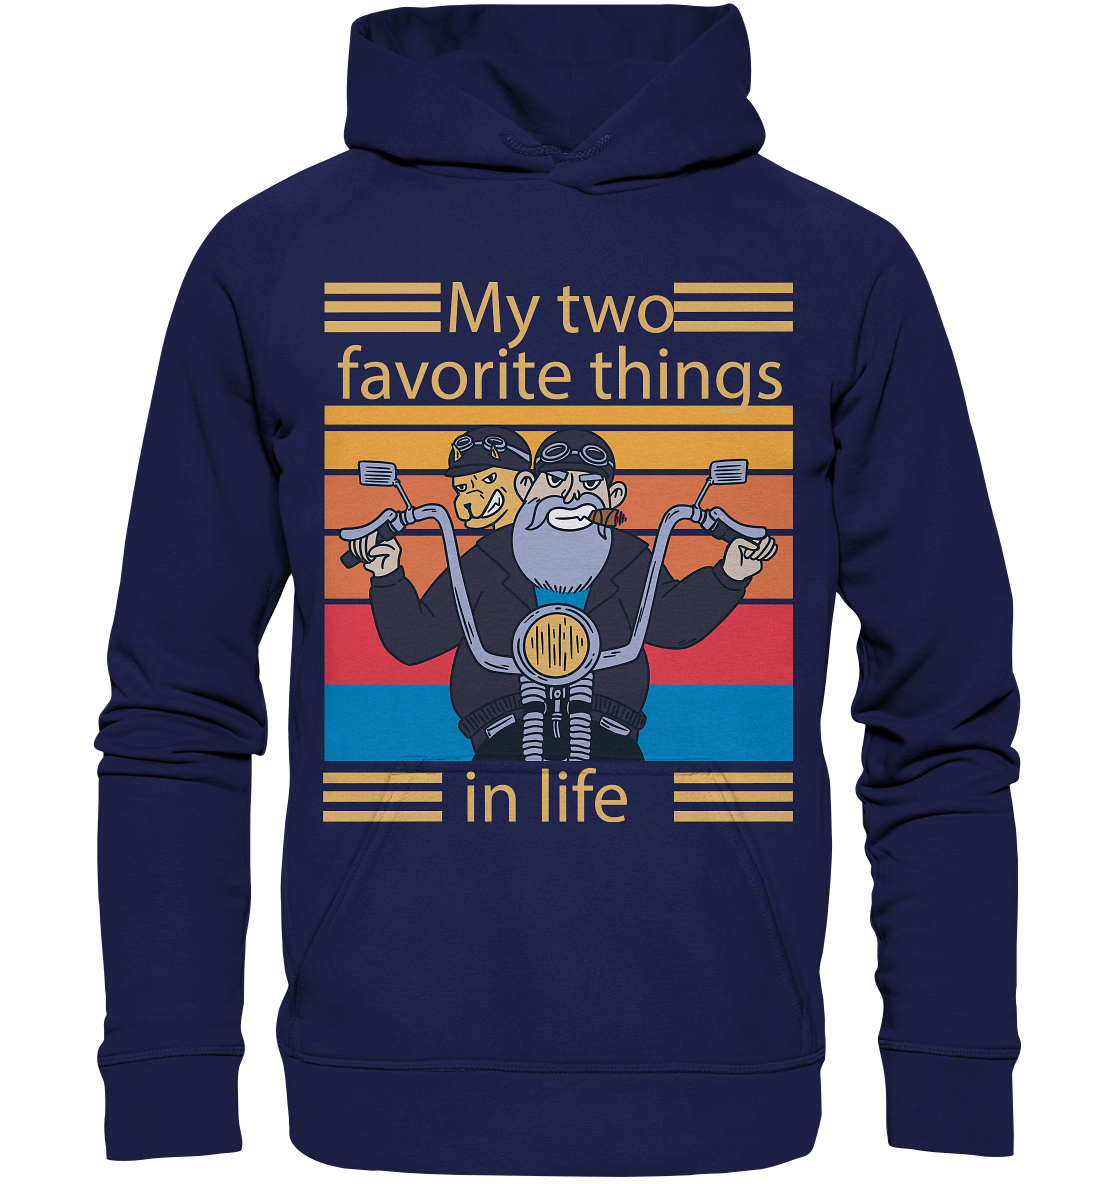 My two favorite things in life - Basic Unisex Hoodie XL - Online Kaufhaus München